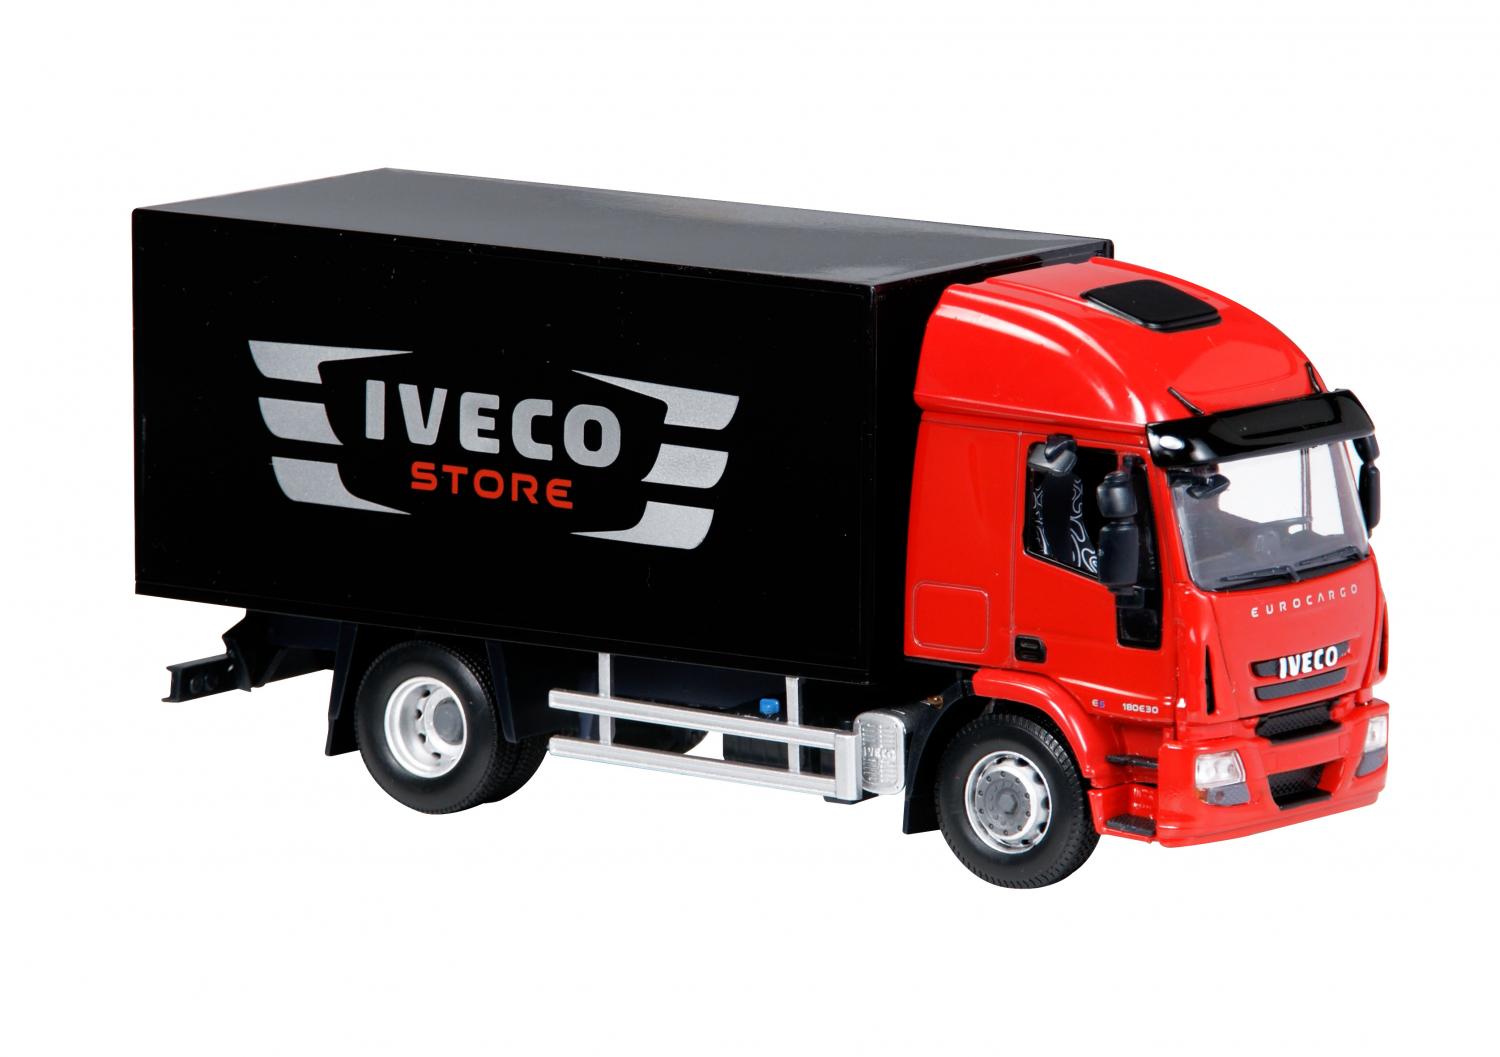 IVECO STORE - MODELS-GIFTS-OFFICE ACCESSORIES